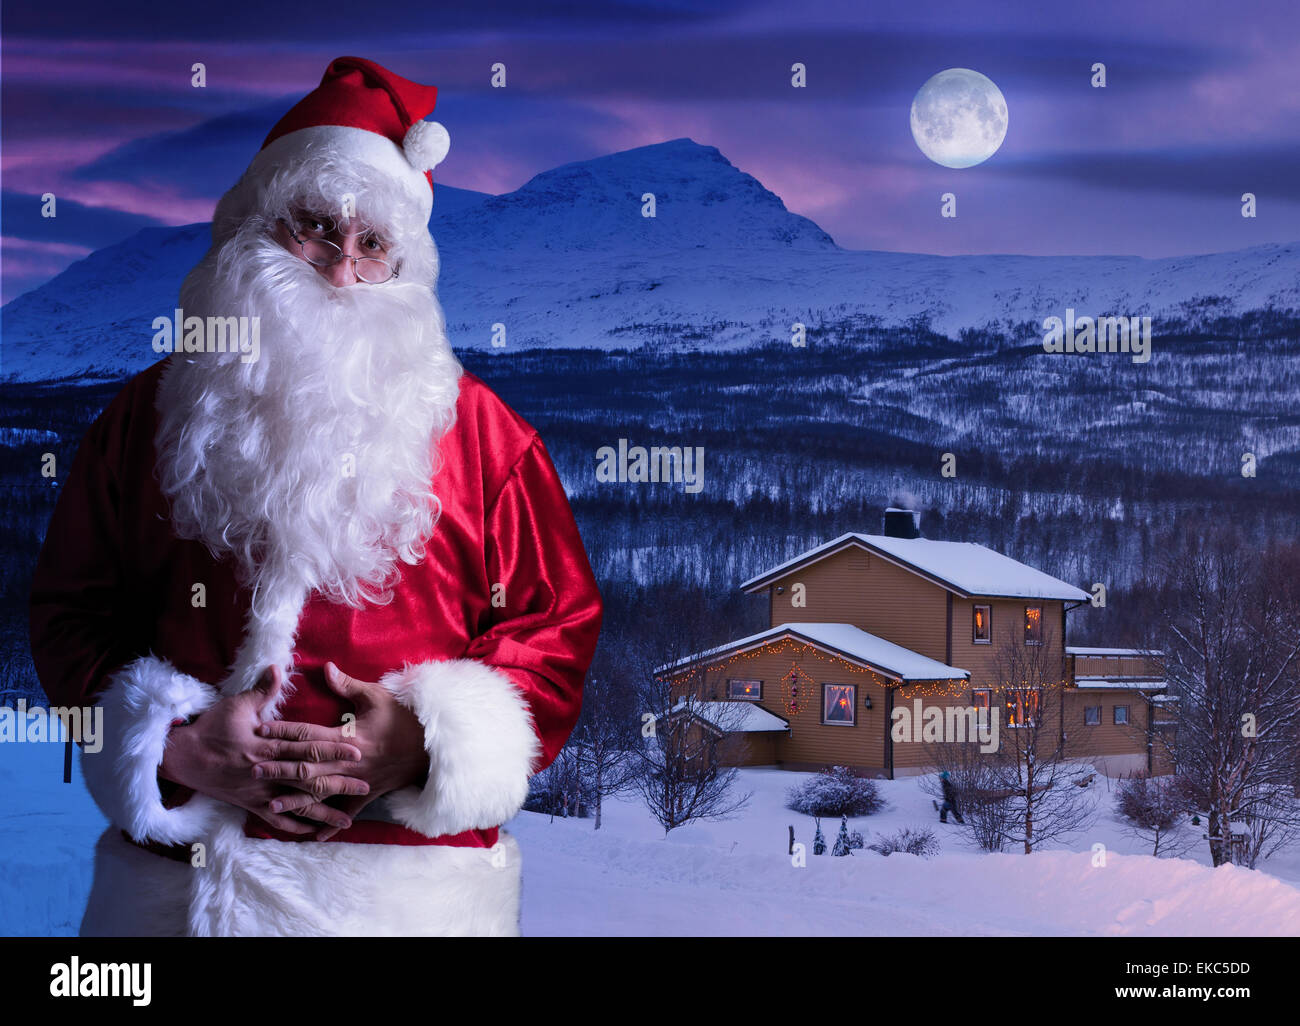 Portrait of Santa Claus at the North Pole Stock Photo